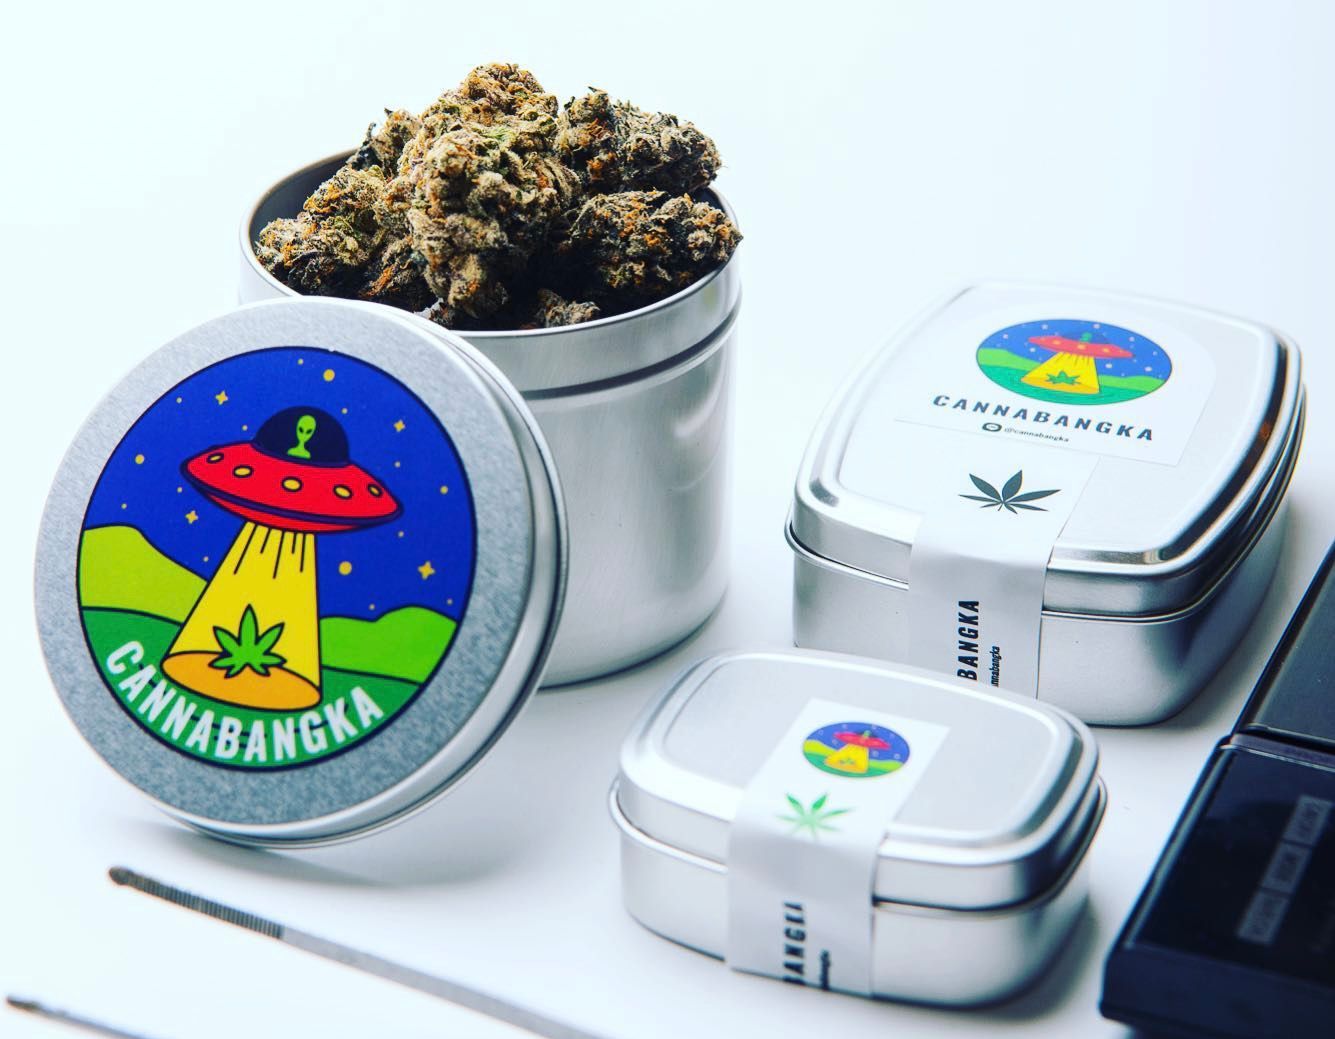 Enjoy a 'special' TABLE discount on various CANNABANGKA products.